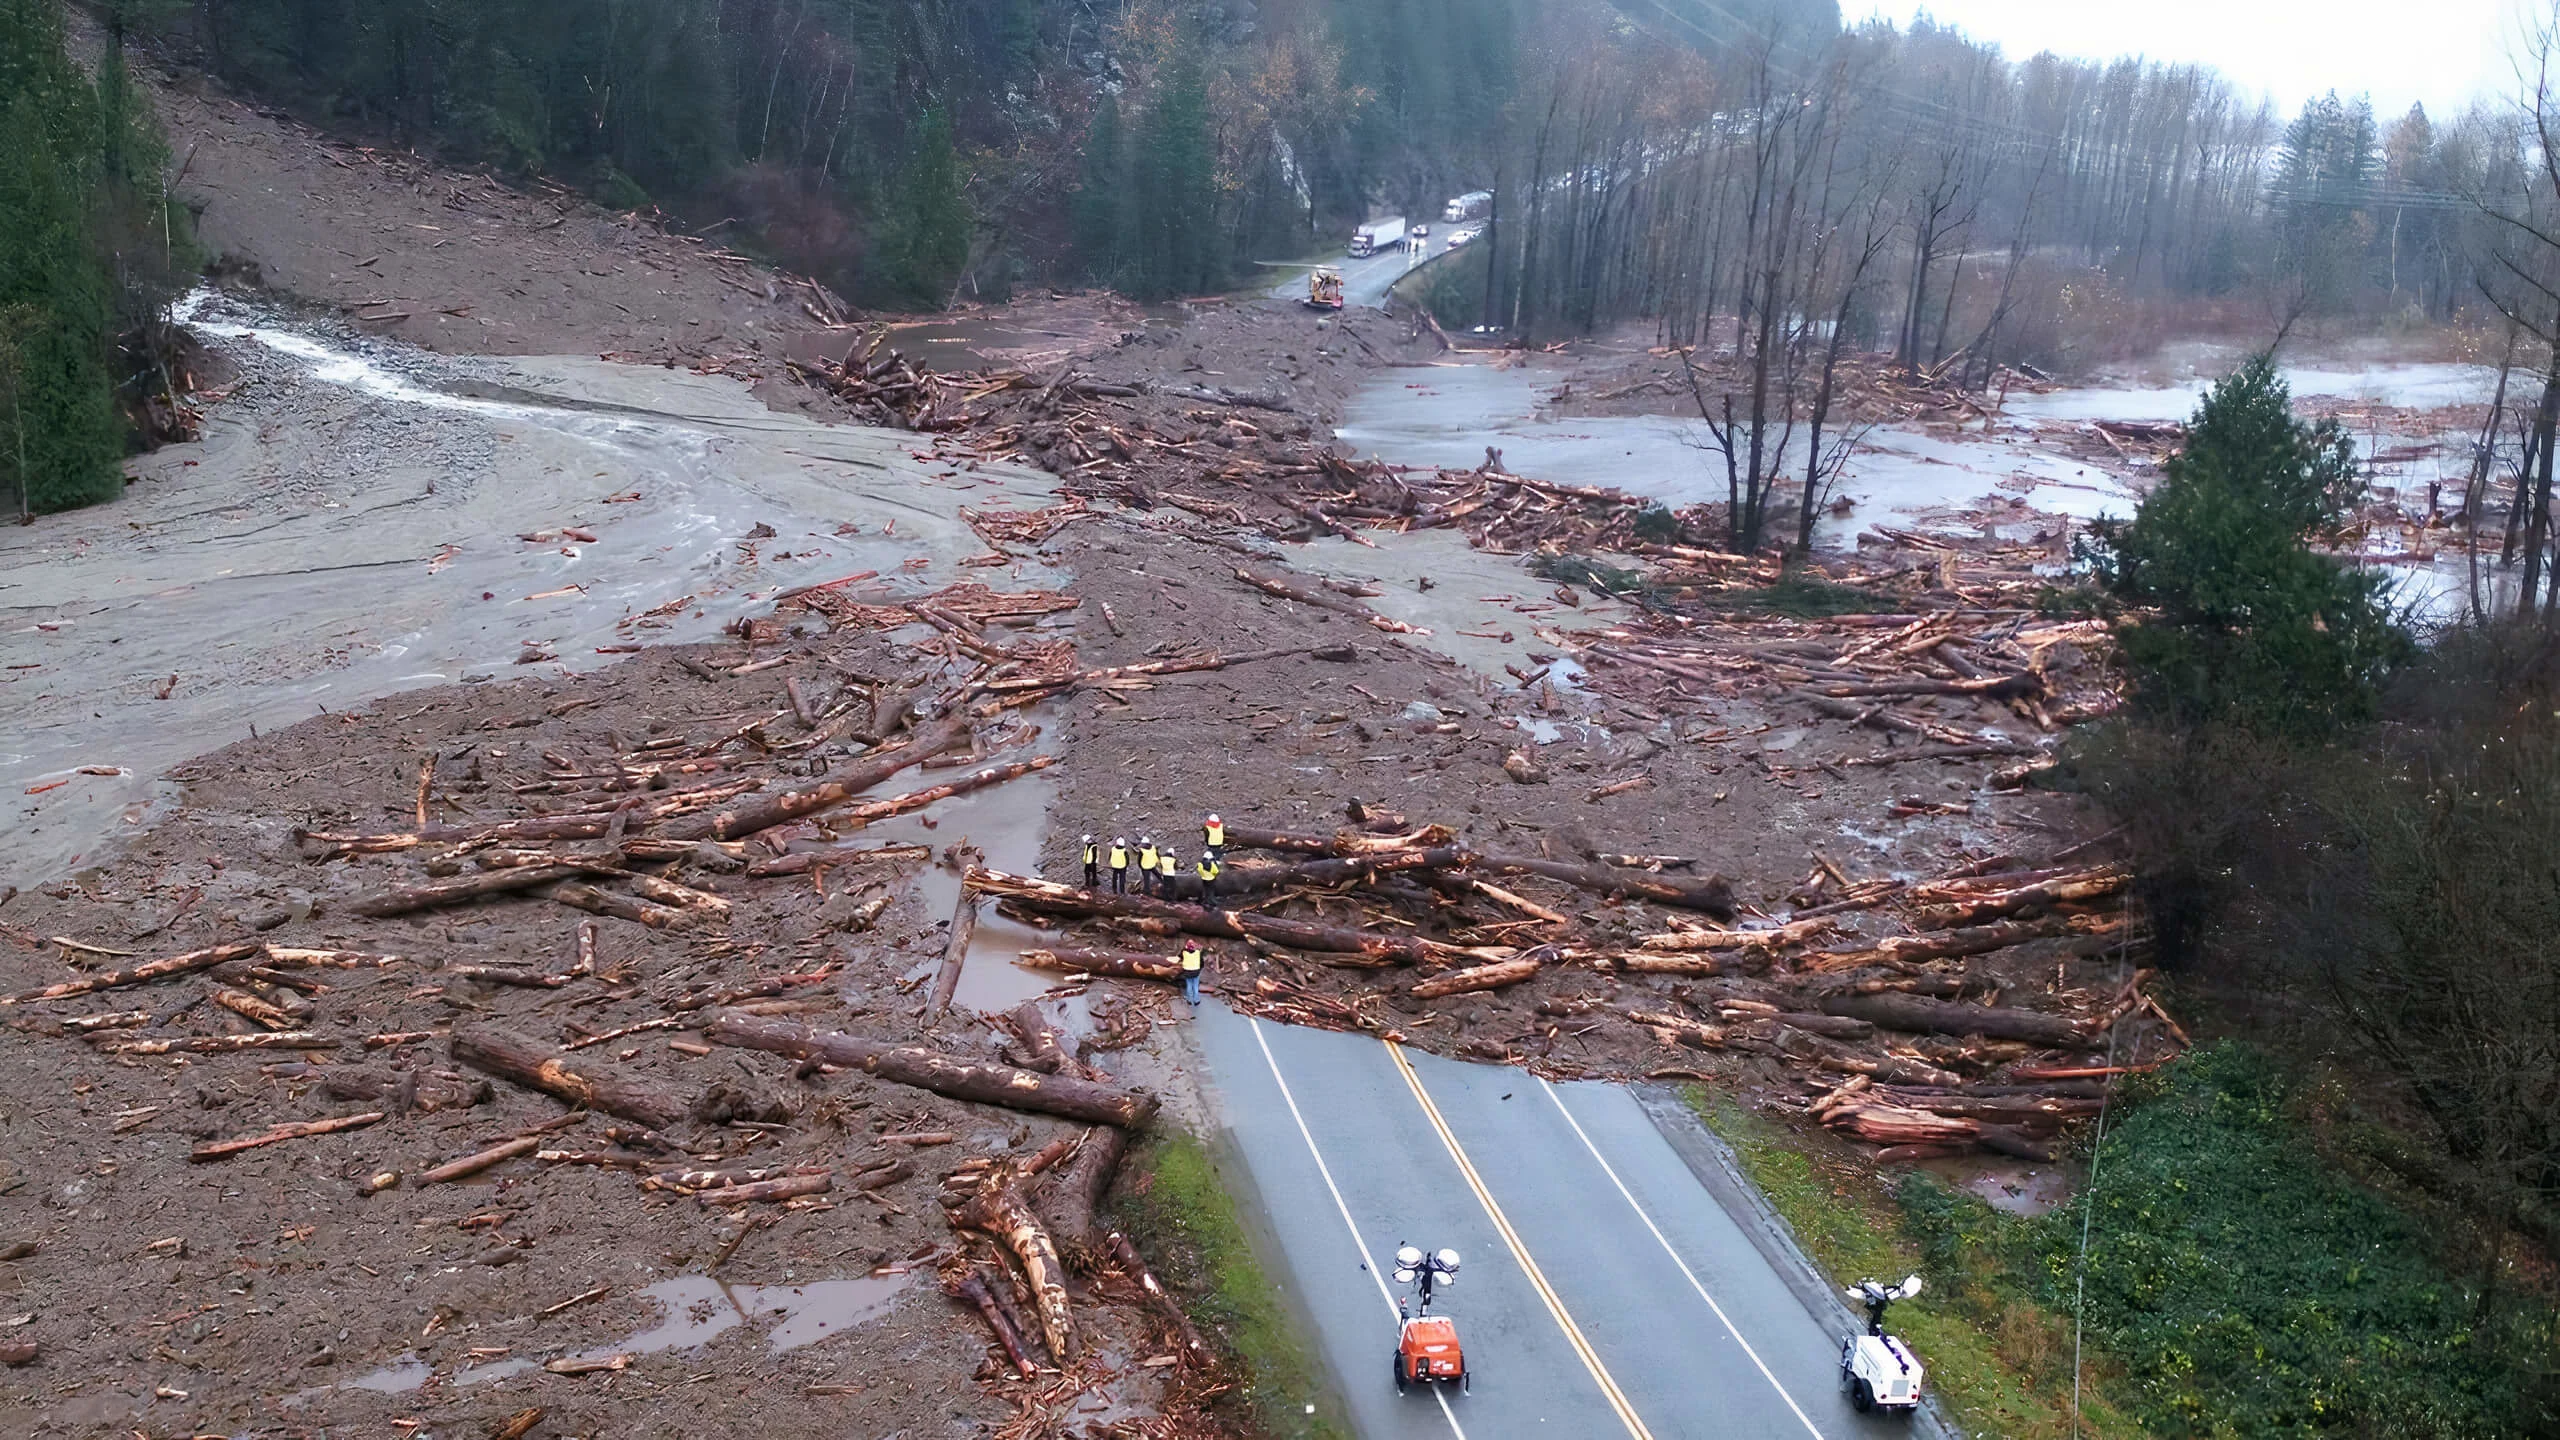 Crews assess a large landslide across Highway 7 at Ruby Creek, B.C., in November 2021. The slide was one of several that paralyzed the transportation industry moving goods between the Lower Mainland and the Interior. (B.C. Ministry of Transportation and Infrastructure)